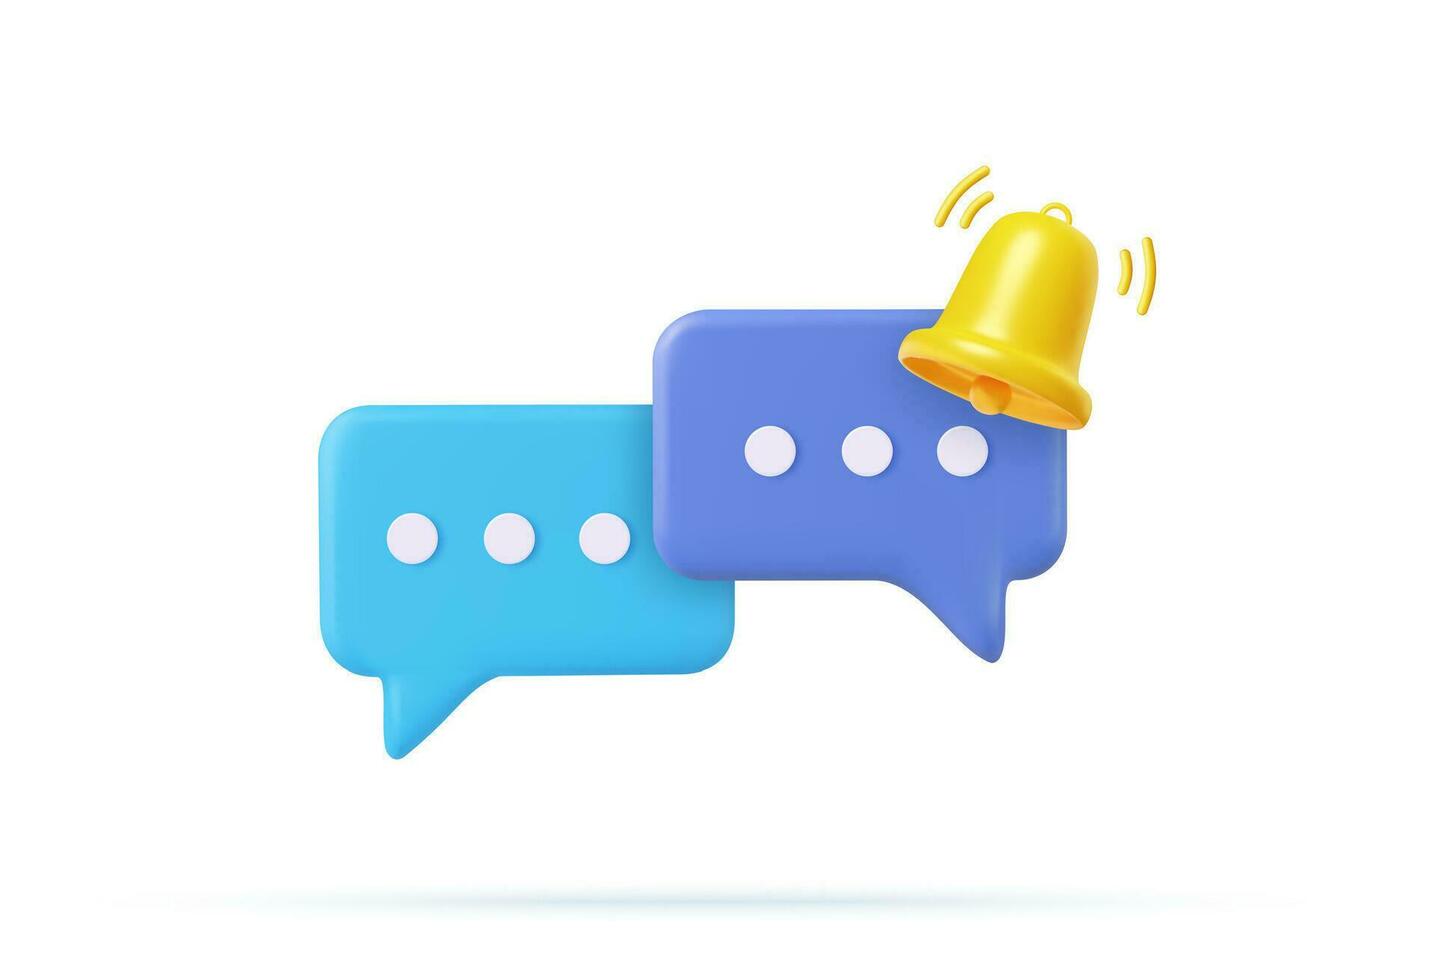 3d Notification bell on speech bubble with text. speech bubble icon with banner for attention or to indicate new information and message. 3d rendering. Vector illustration